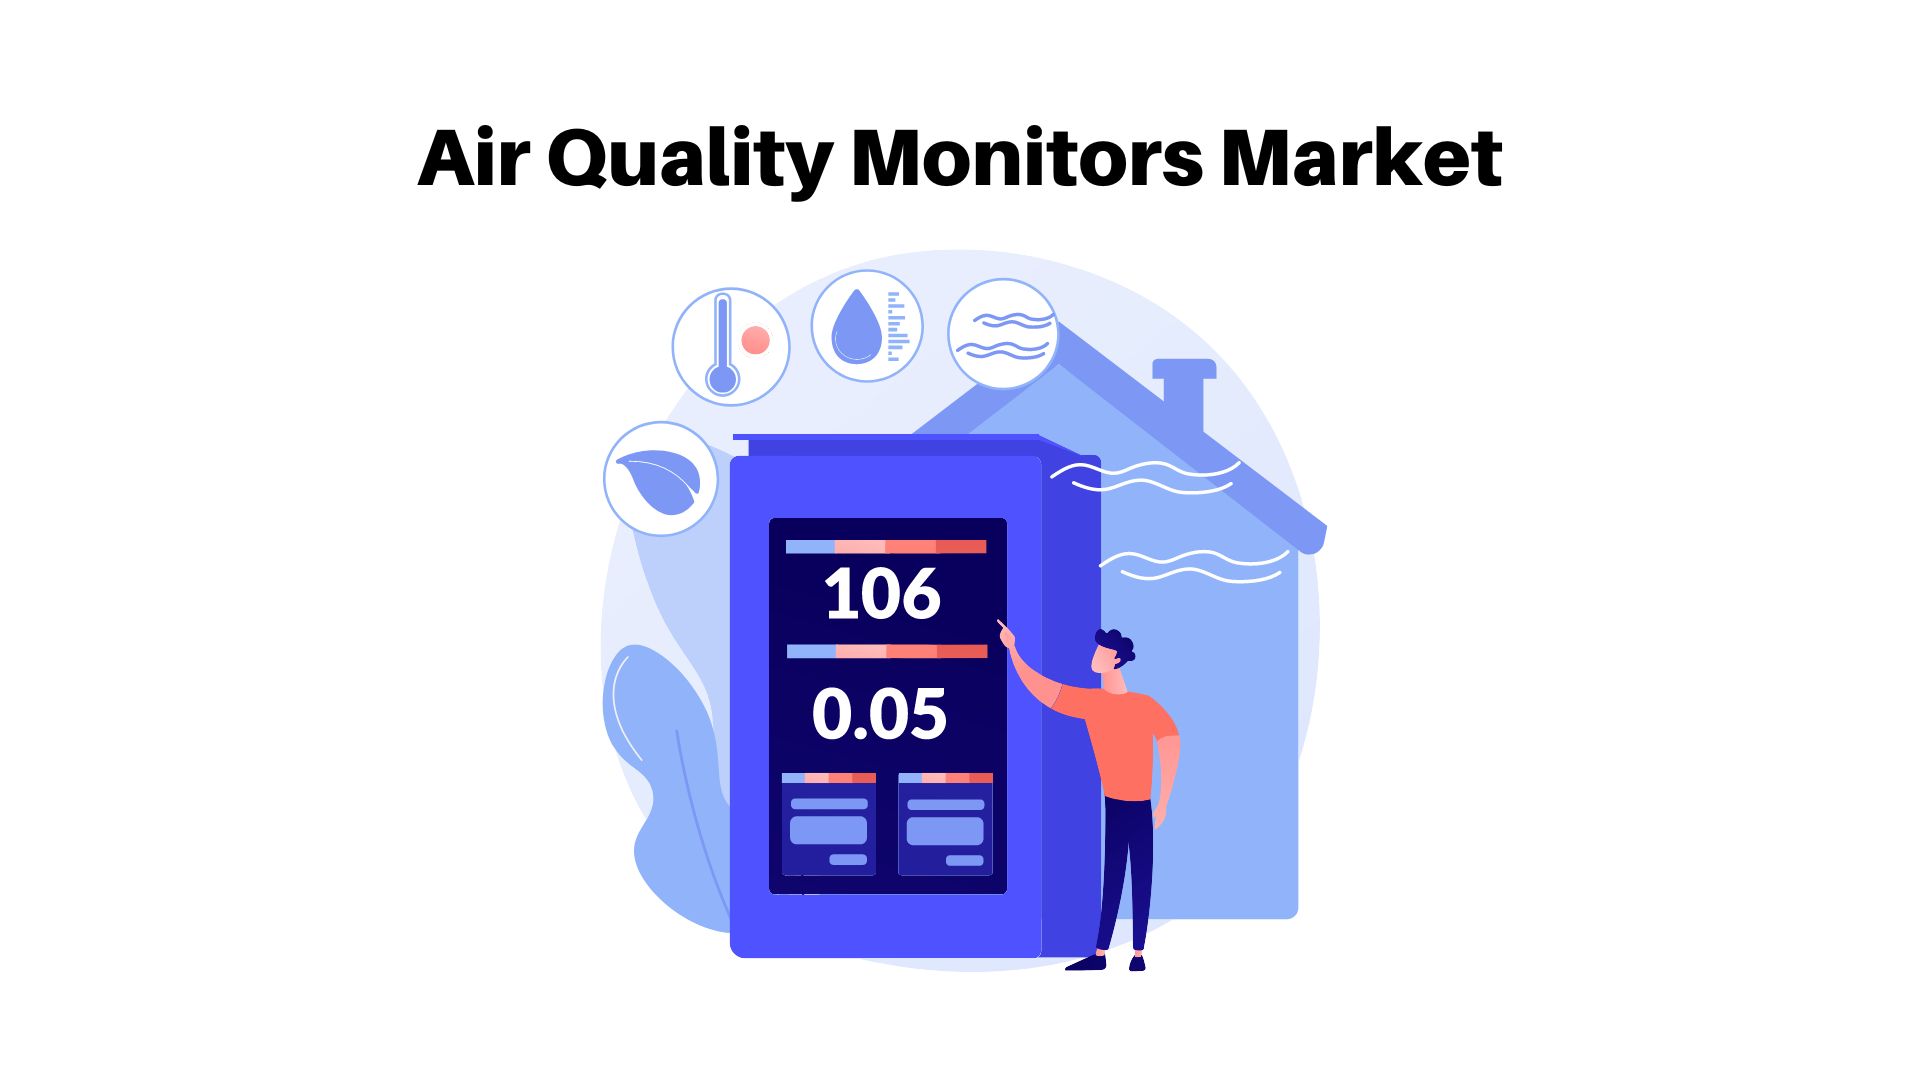 Air Quality Monitors Market was valued at nearly USD 6.9 billion by 2032